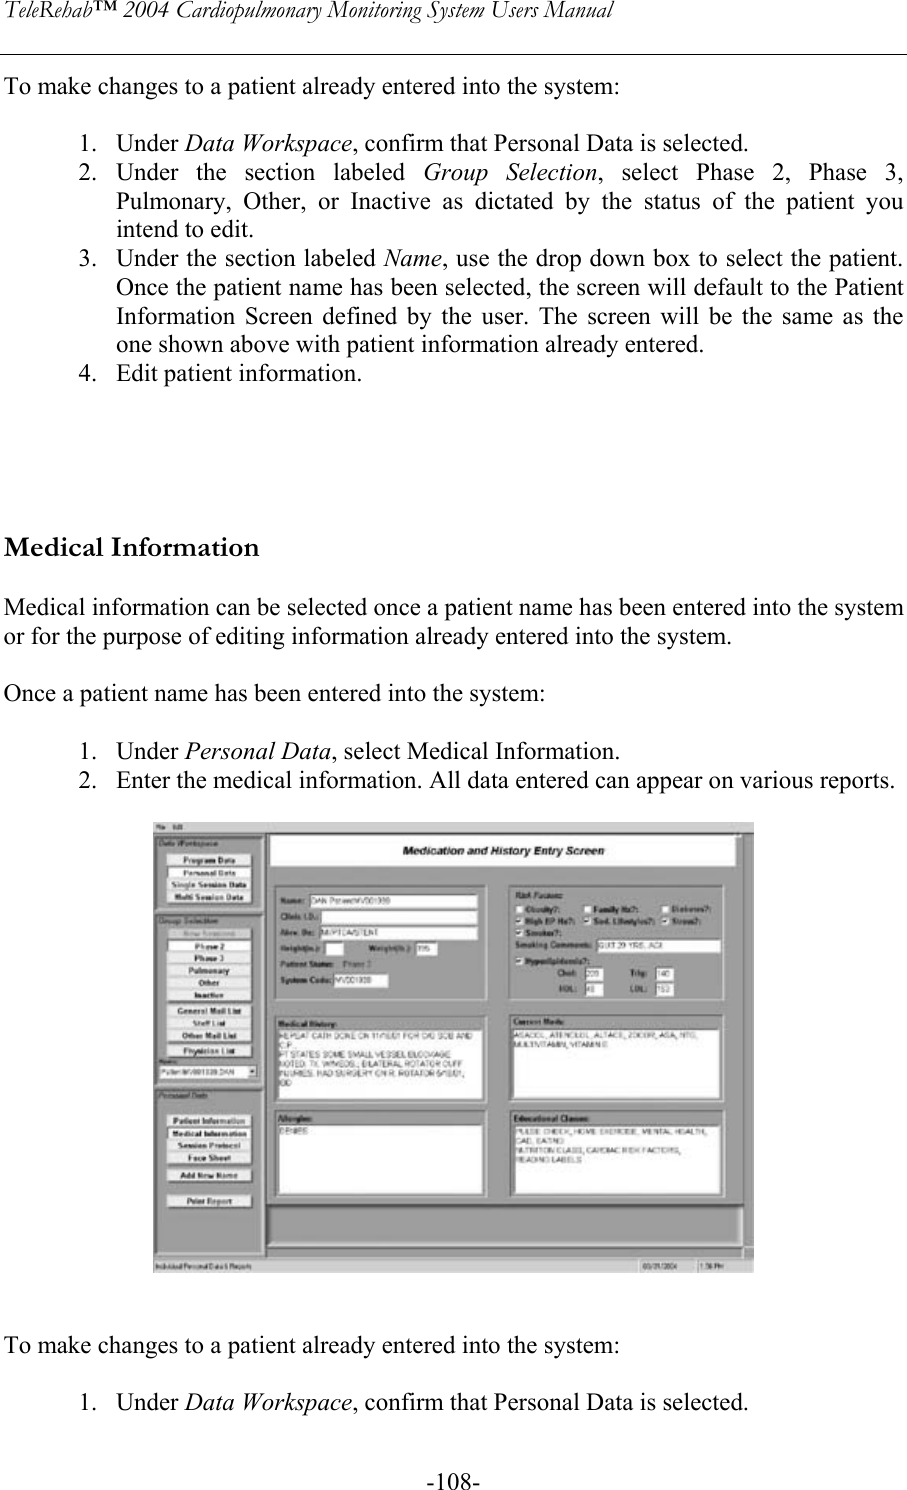 TeleRehab™ 2004 Cardiopulmonary Monitoring System Users Manual    -108-To make changes to a patient already entered into the system:  1. Under Data Workspace, confirm that Personal Data is selected. 2. Under the section labeled Group Selection, select Phase 2, Phase 3, Pulmonary, Other, or Inactive as dictated by the status of the patient you intend to edit.  3. Under the section labeled Name, use the drop down box to select the patient. Once the patient name has been selected, the screen will default to the Patient Information Screen defined by the user. The screen will be the same as the one shown above with patient information already entered. 4. Edit patient information.      Medical Information  Medical information can be selected once a patient name has been entered into the system or for the purpose of editing information already entered into the system.   Once a patient name has been entered into the system:  1. Under Personal Data, select Medical Information. 2. Enter the medical information. All data entered can appear on various reports.     To make changes to a patient already entered into the system:  1. Under Data Workspace, confirm that Personal Data is selected. 